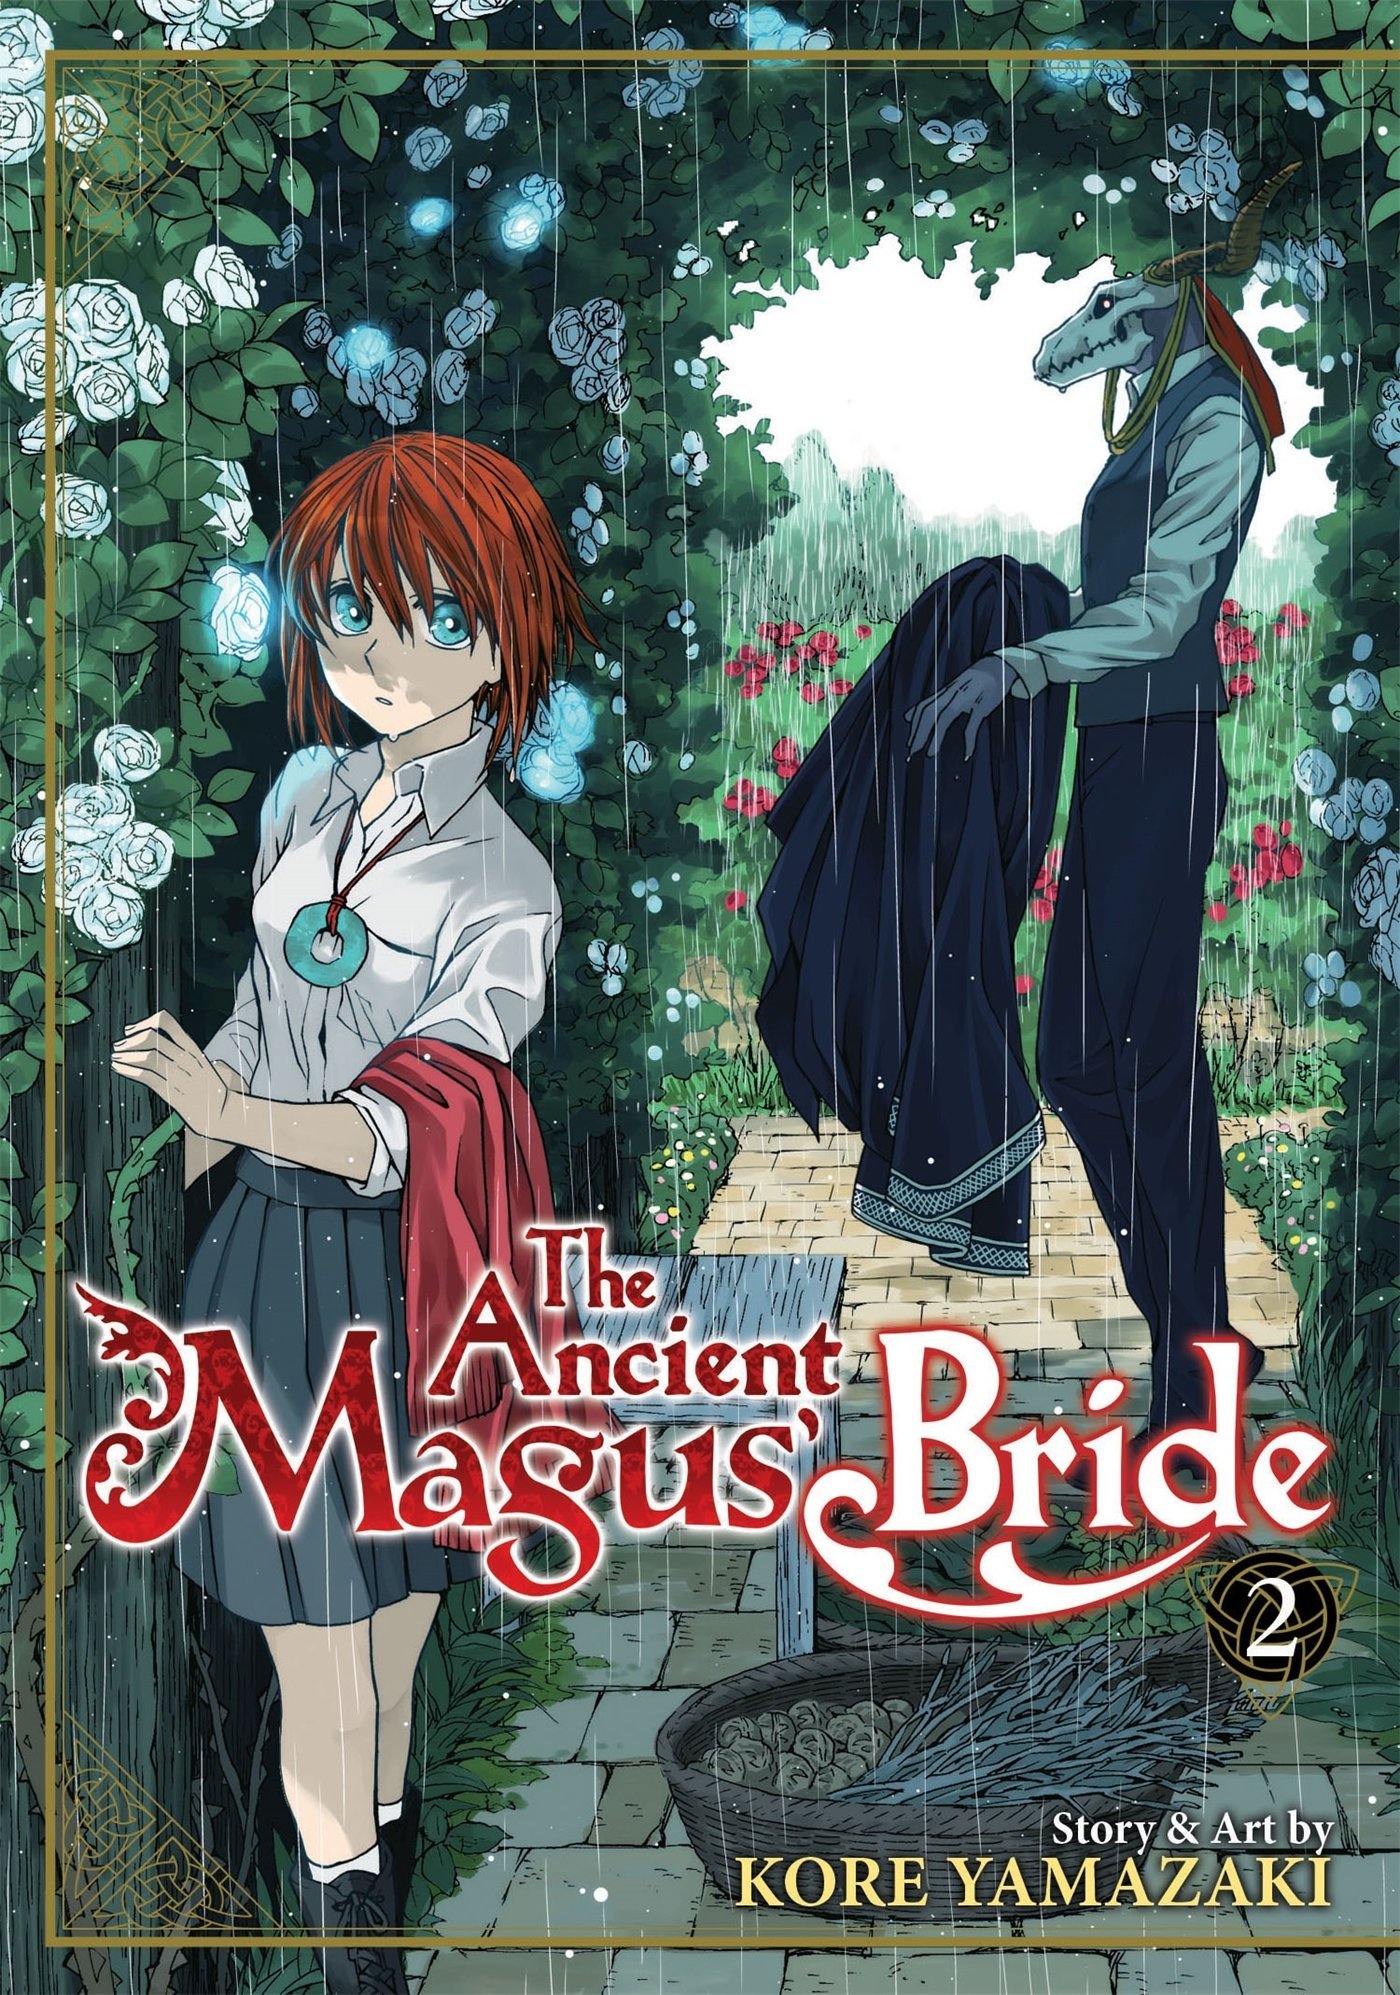 I'd Rather Review | The Ancient Magus' Bride – I'd Rather Anime